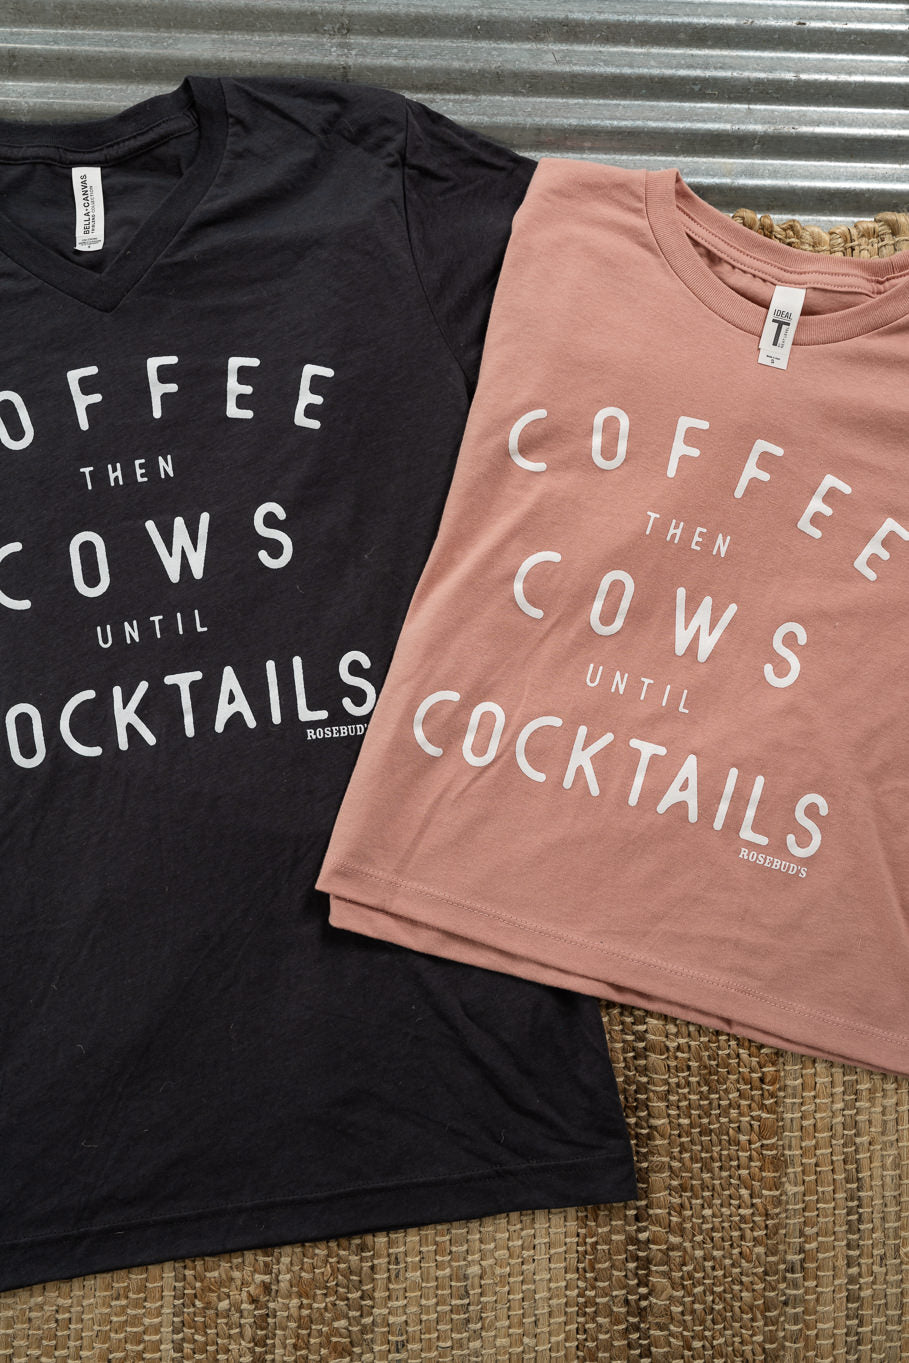 Coffee then Cows Until Cocktails Cropped Graphic Tee | Sizes S- 3XL